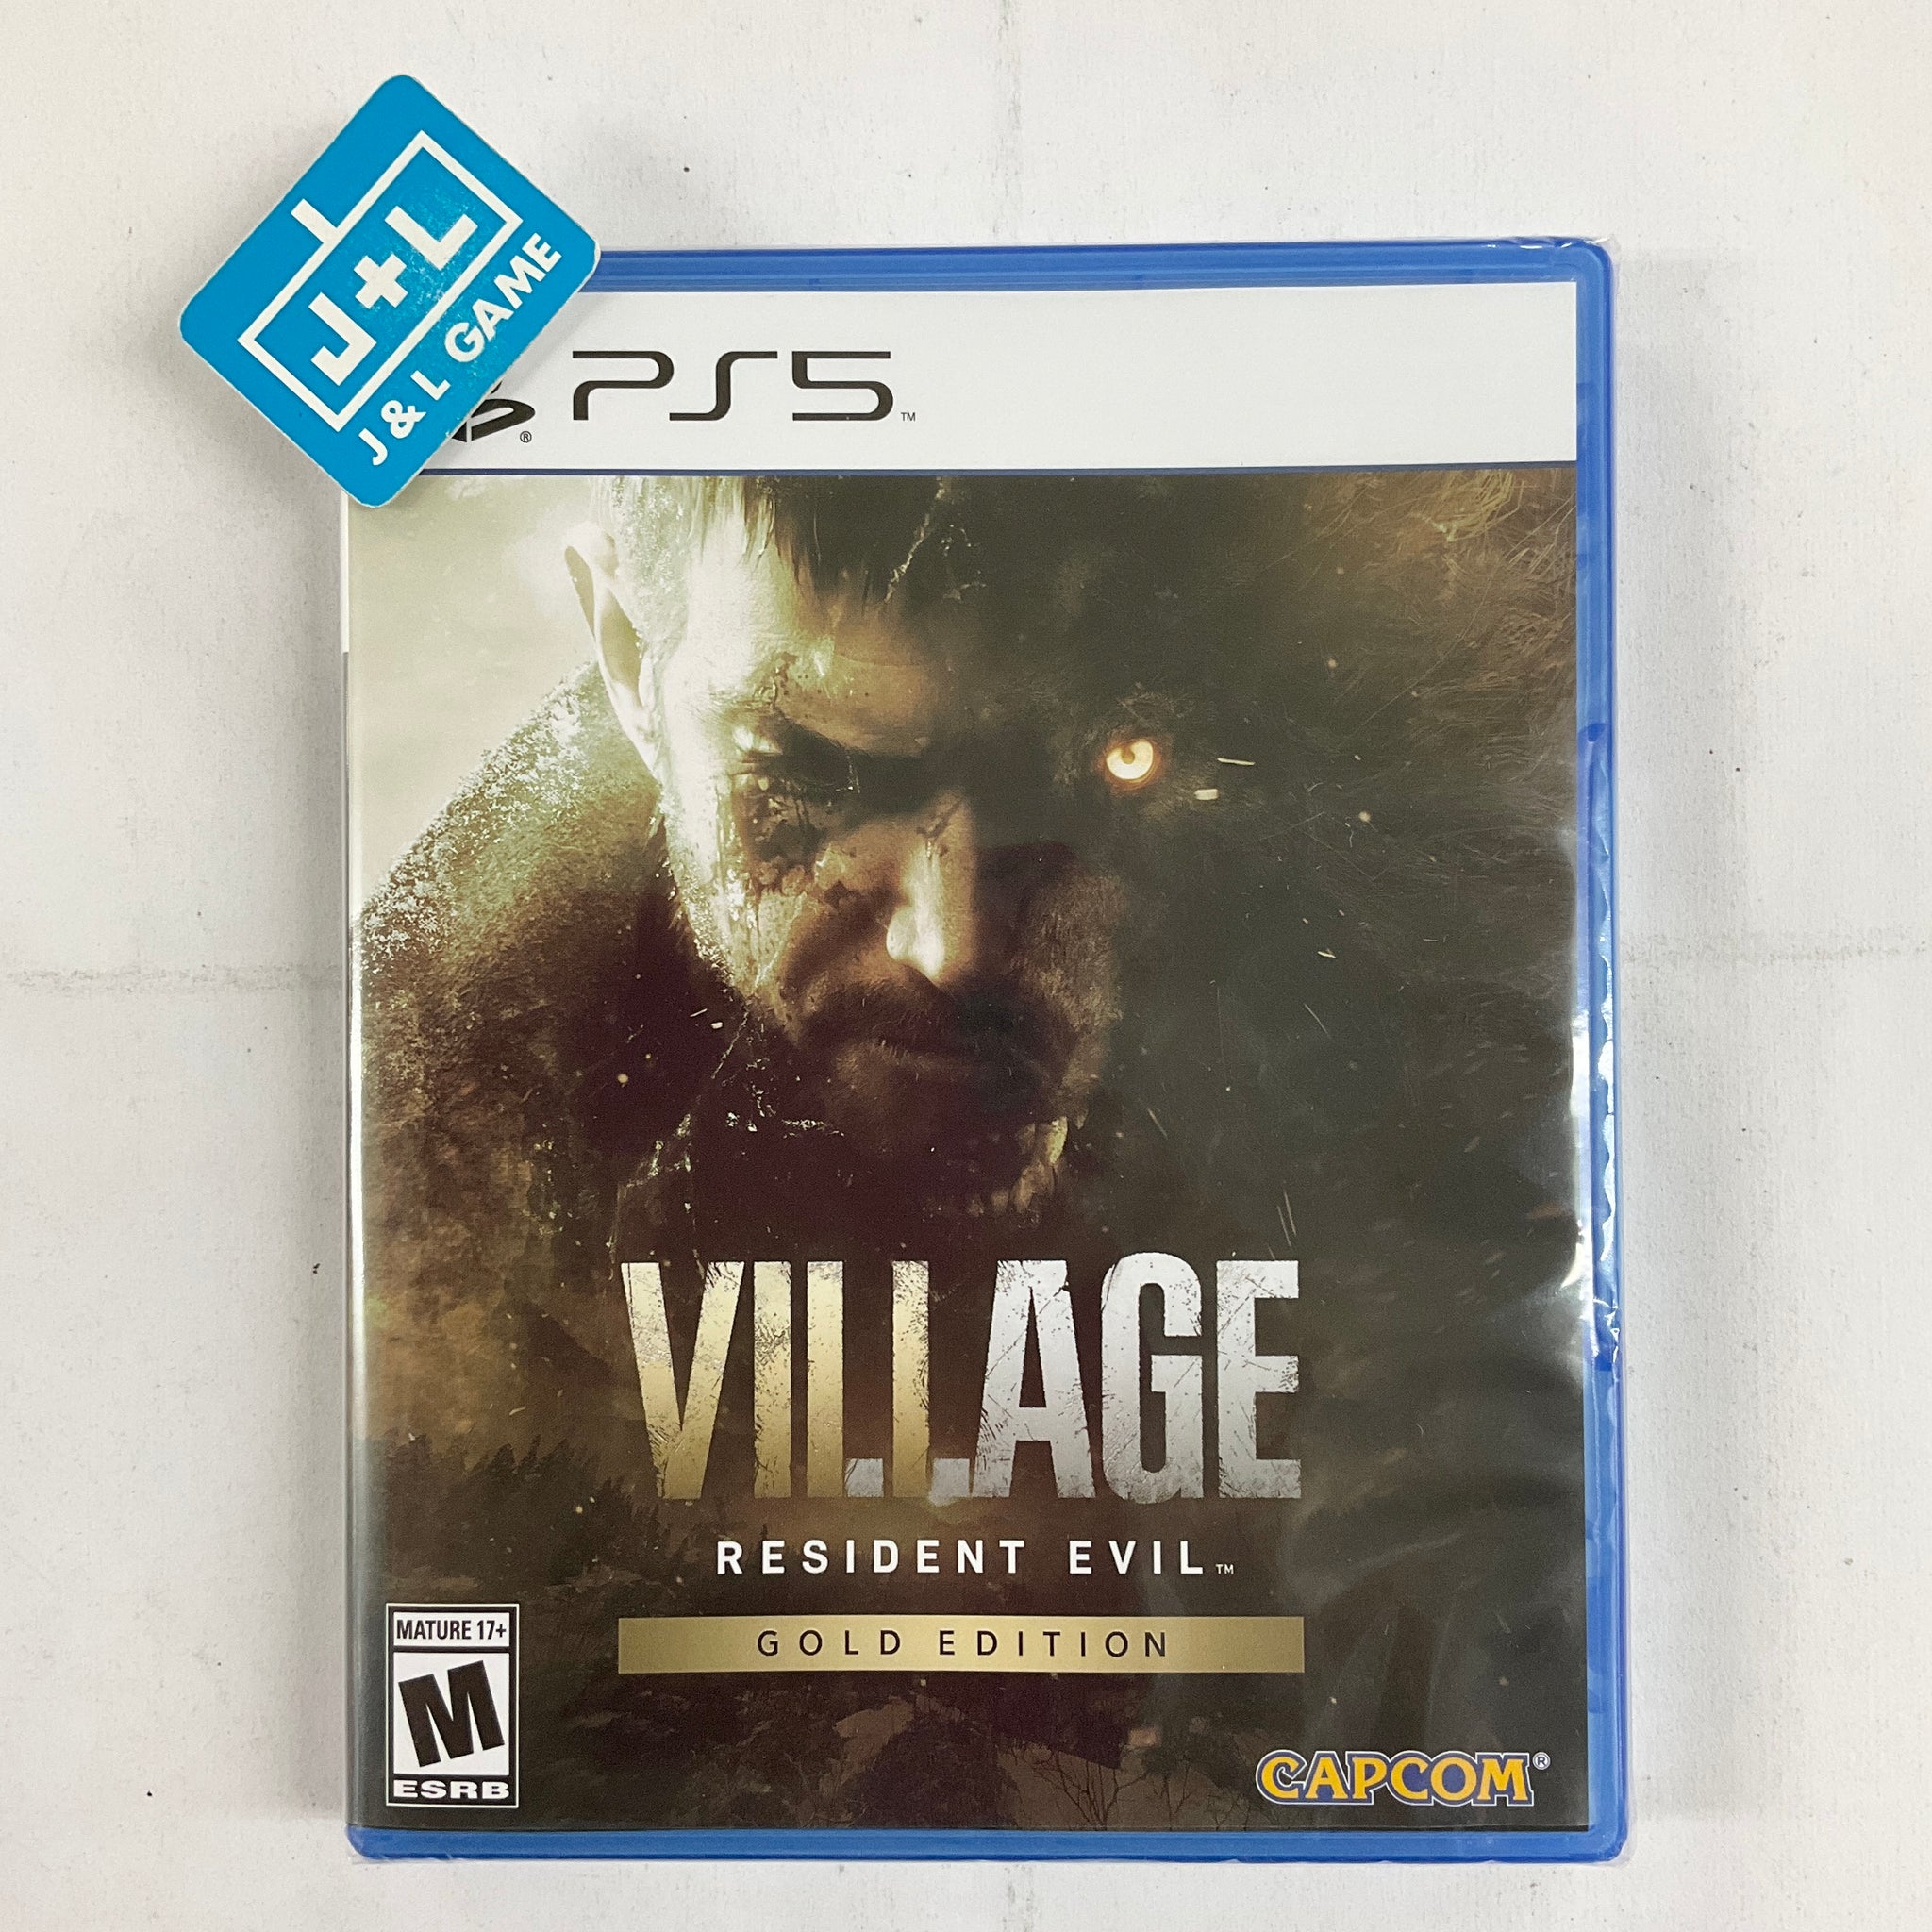 Resident Evil Village Gold ED - XBox Series X (Pack of 1)